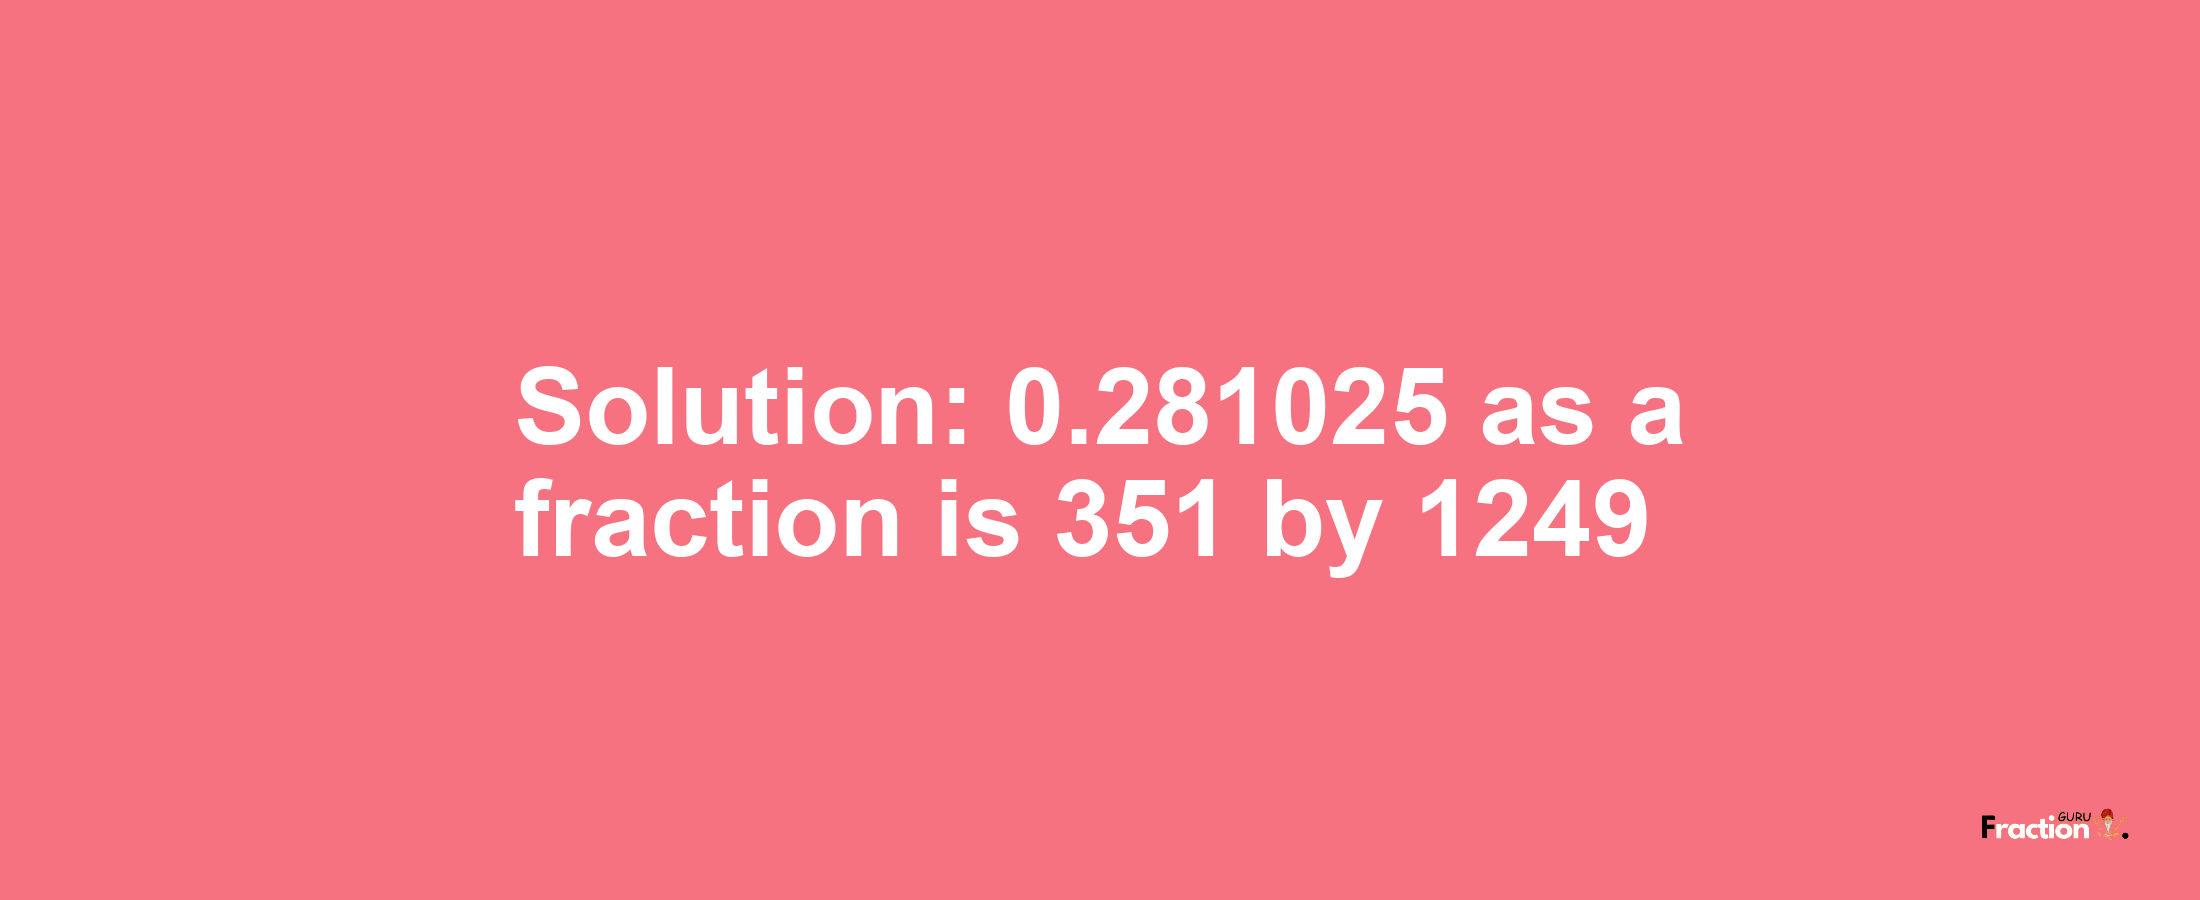 Solution:0.281025 as a fraction is 351/1249